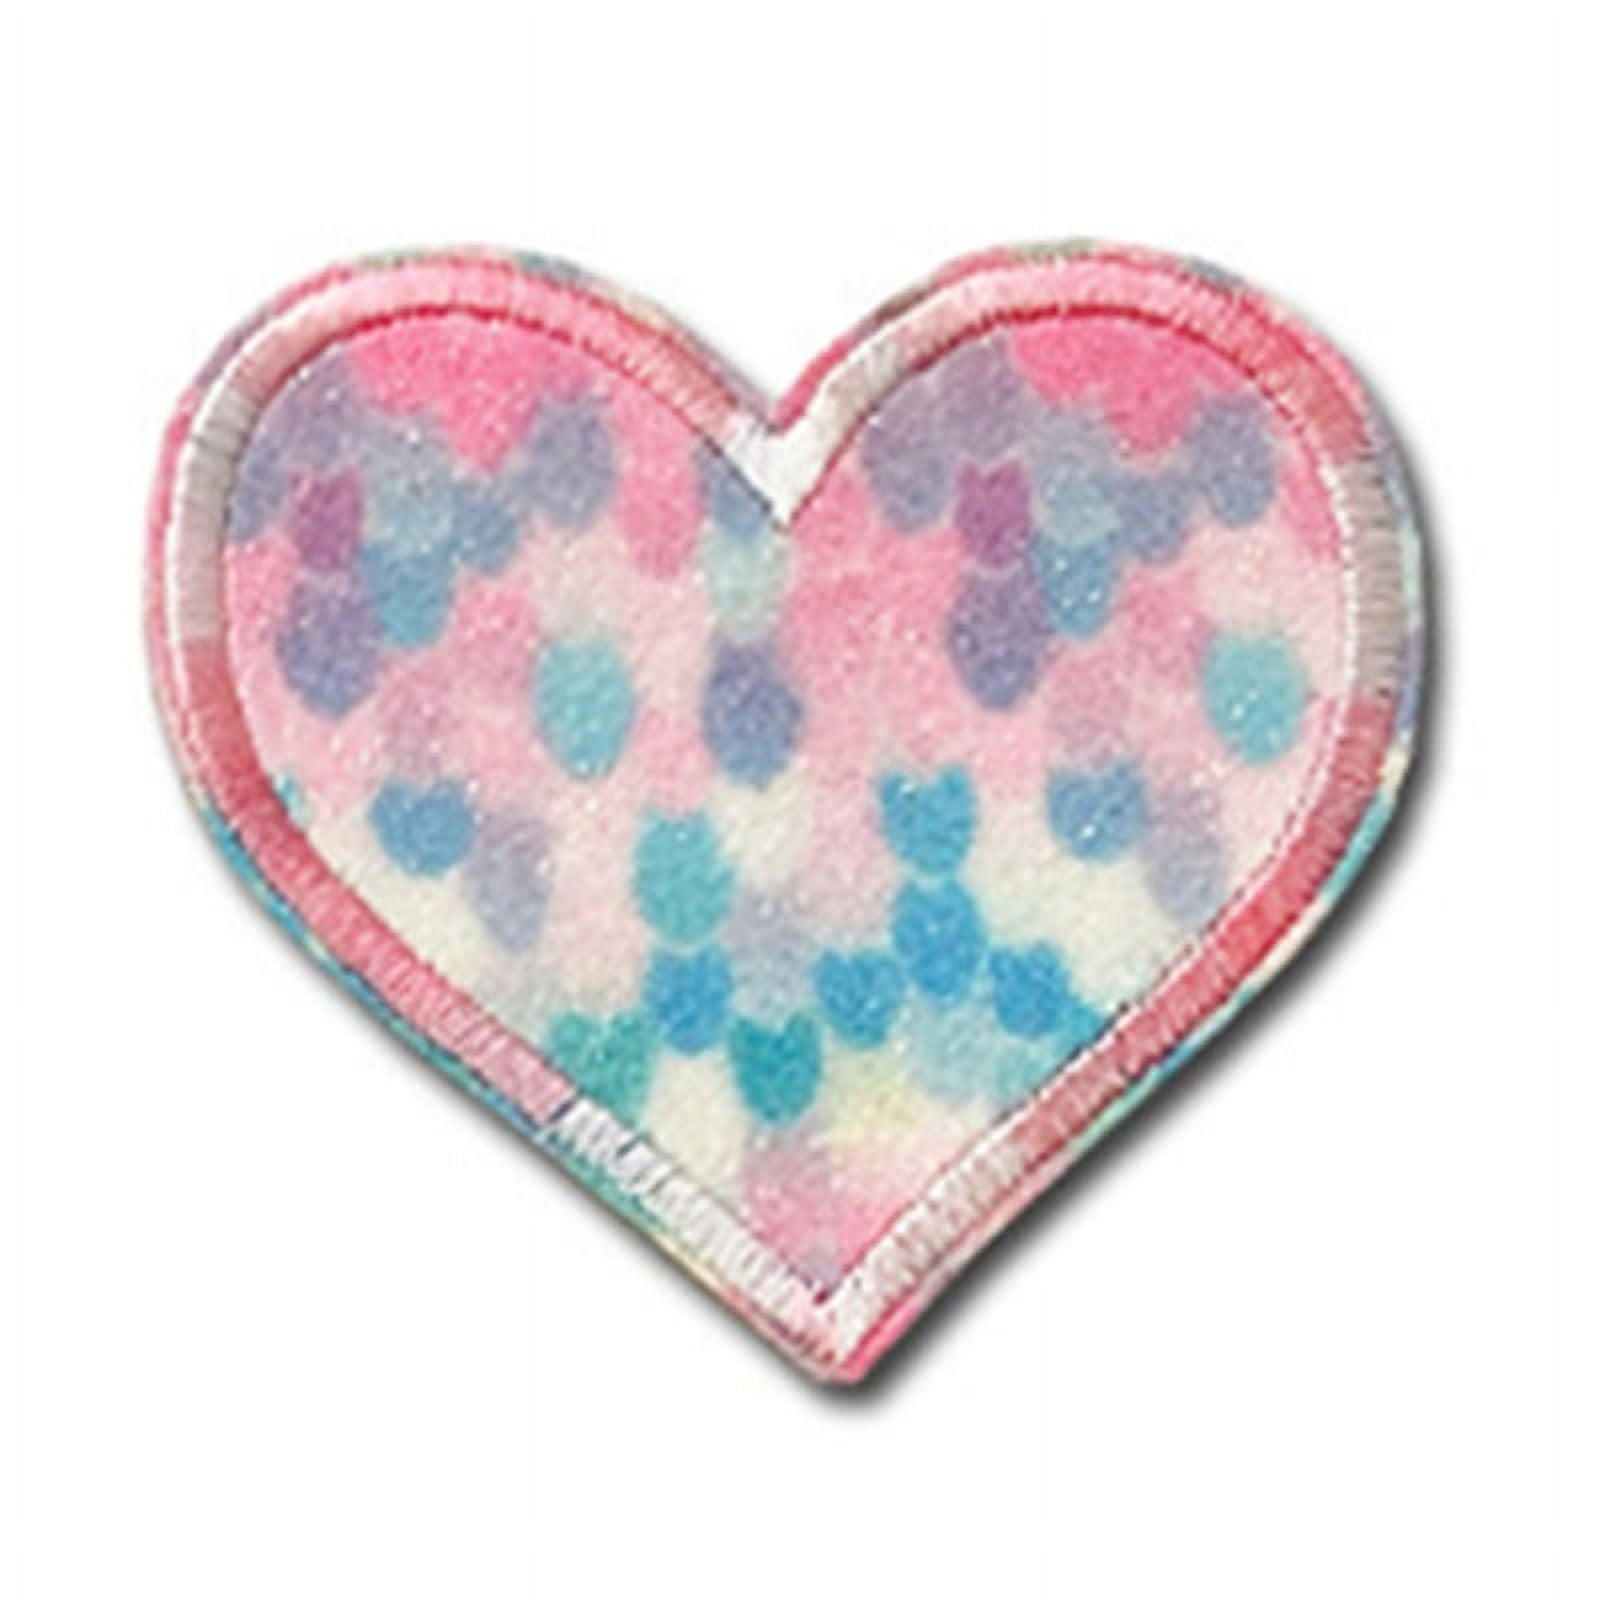 Heart Patches for Clothes Pink Heart Patches DIY Craft Heart Iron